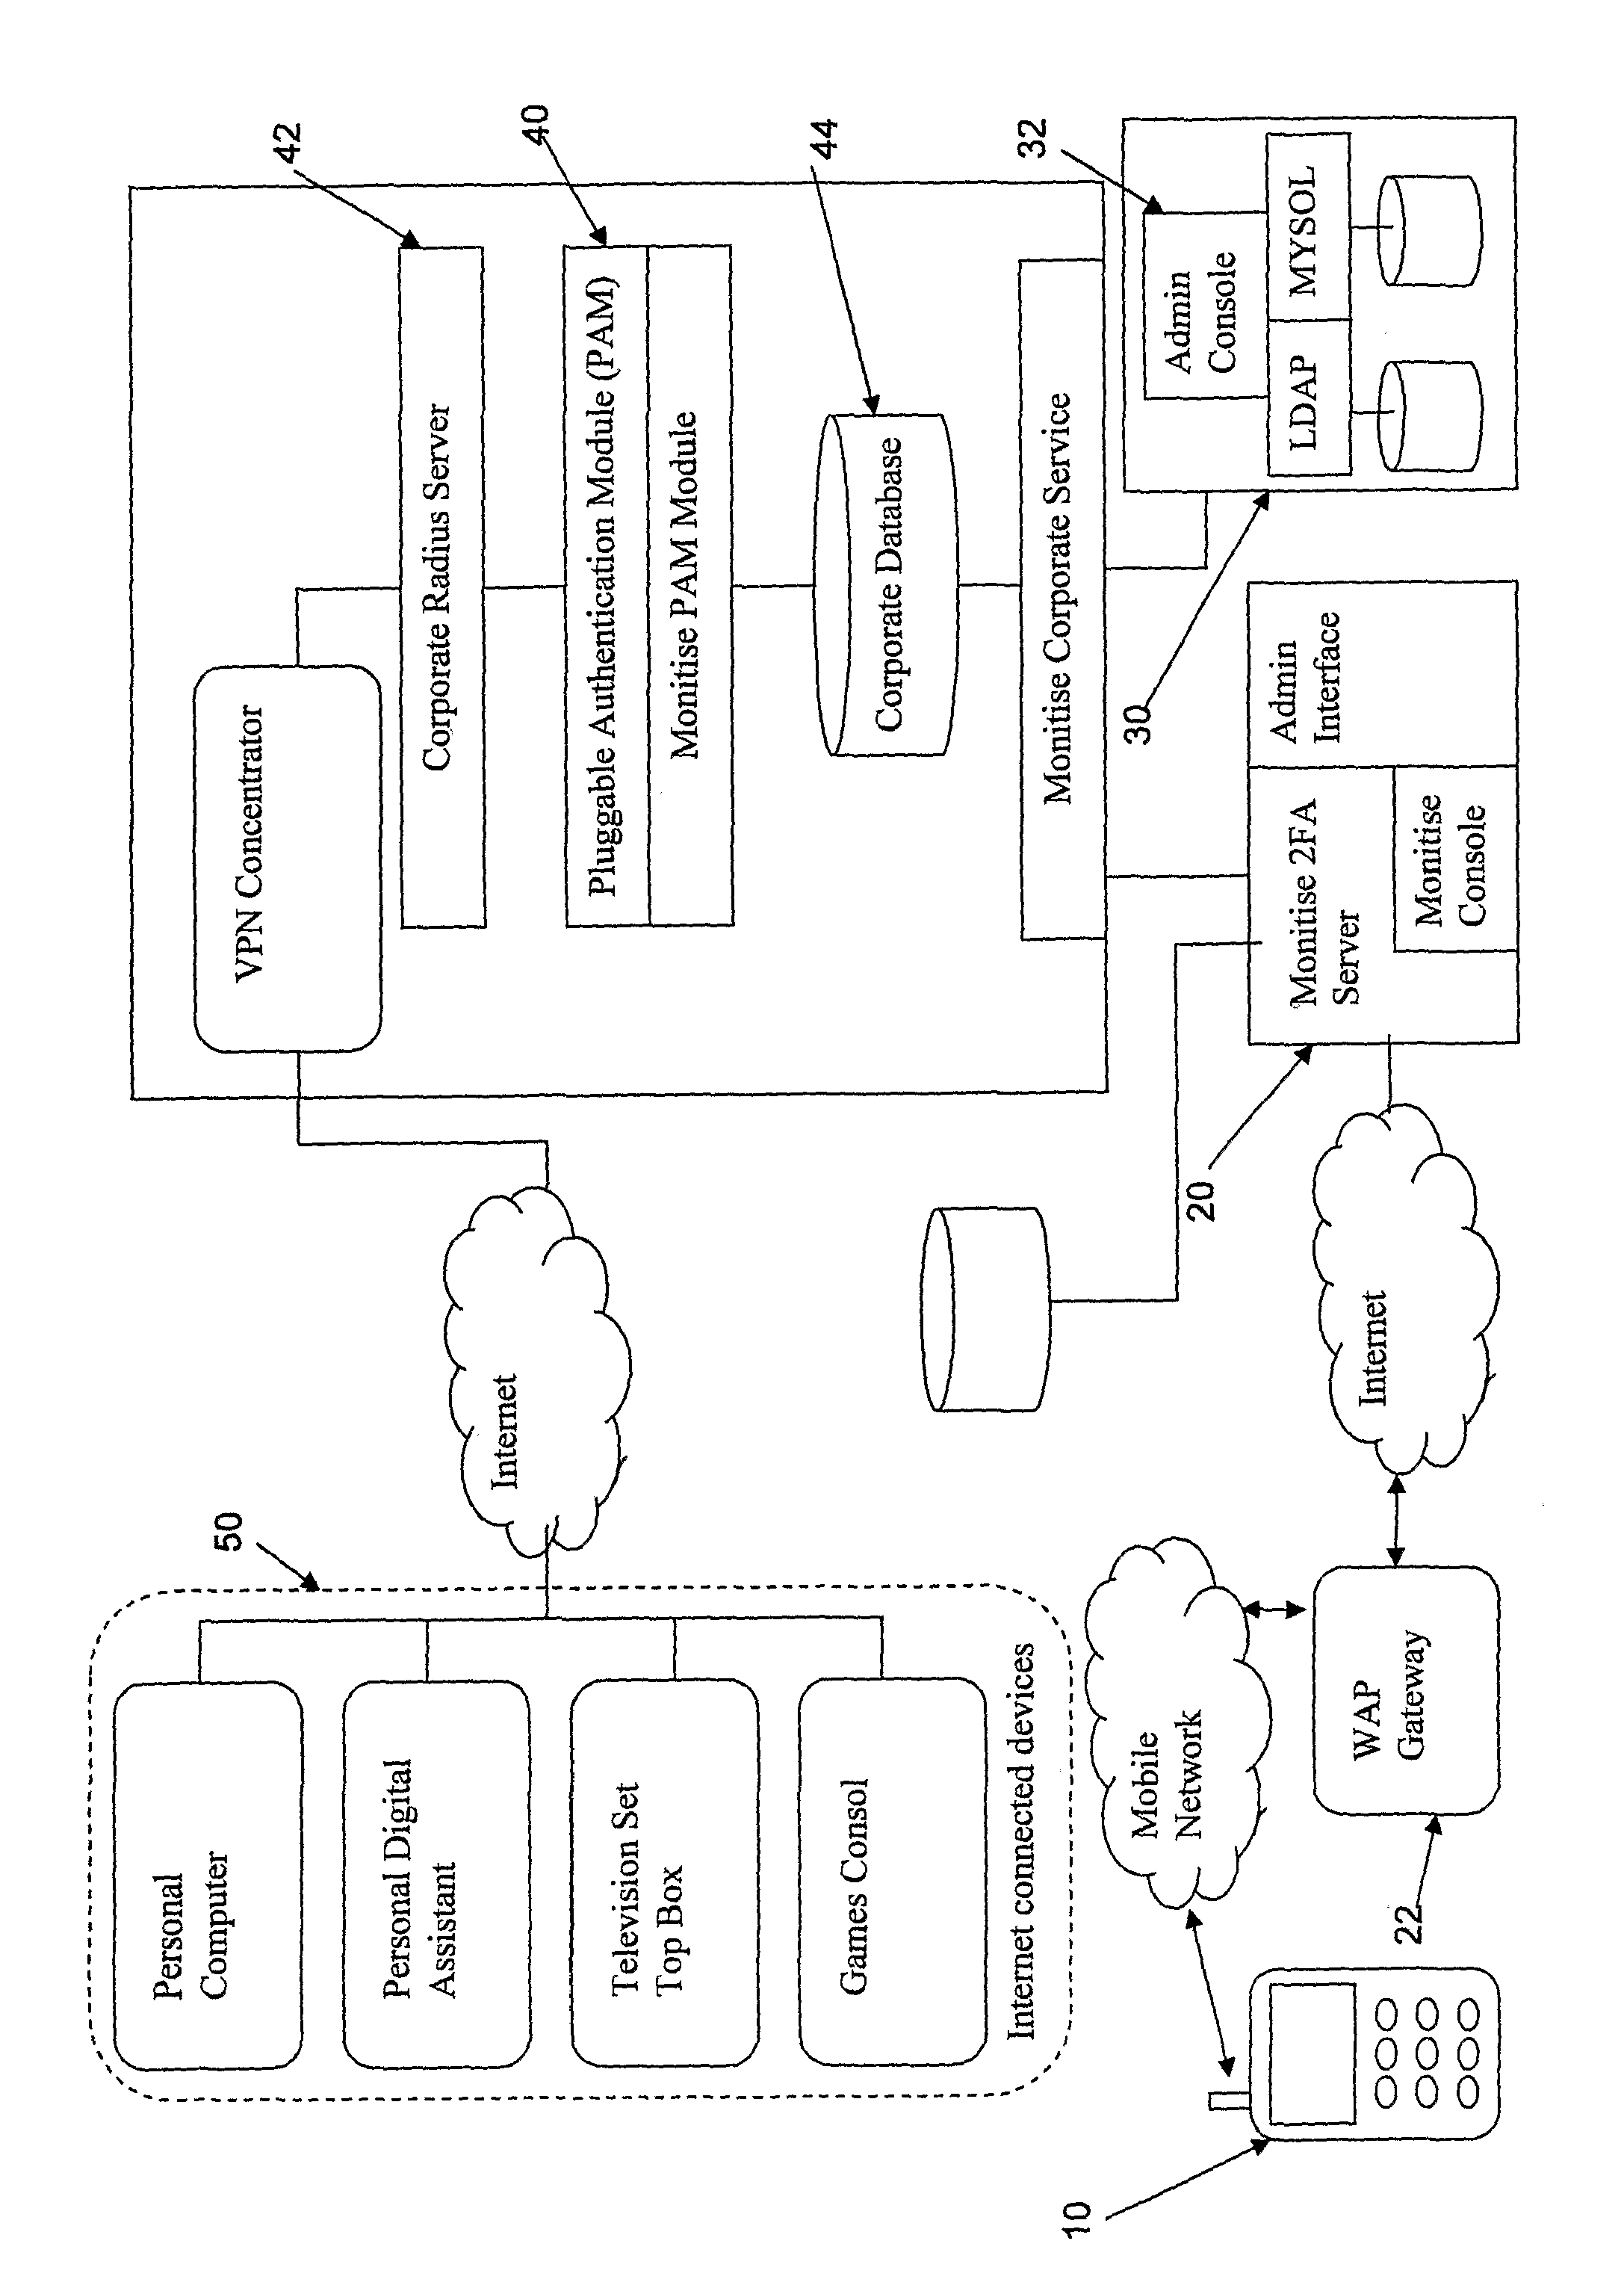 Electronic system for securing electronic services